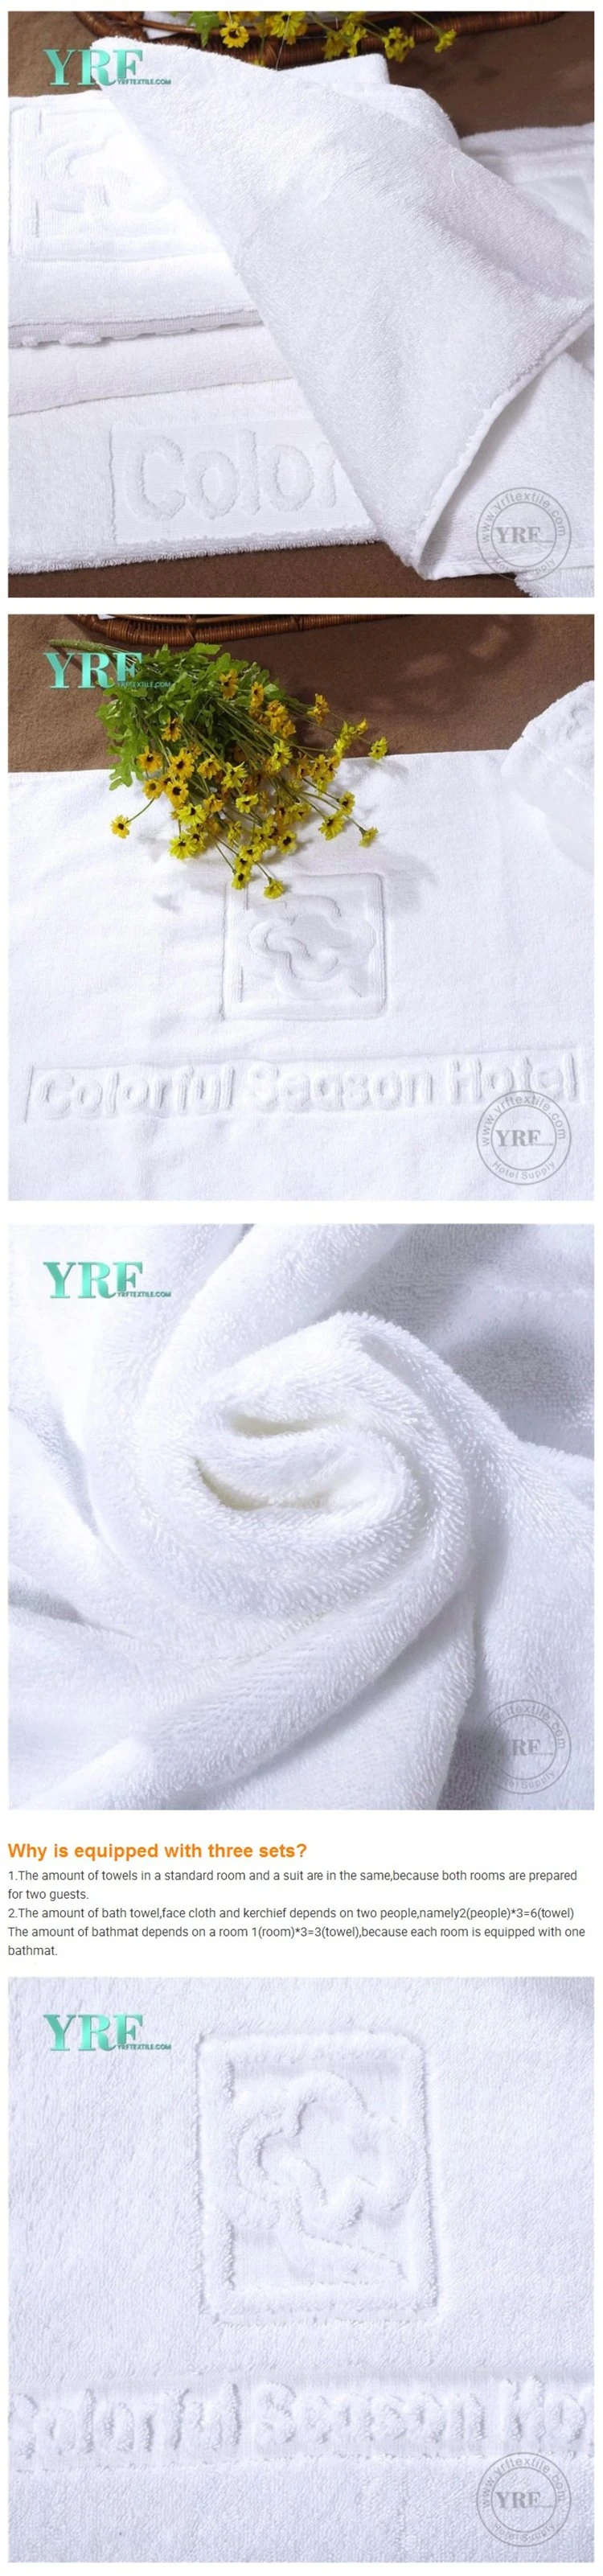 China Wholesale Hotel Comfortable Fluffy Water Absorption White Towel